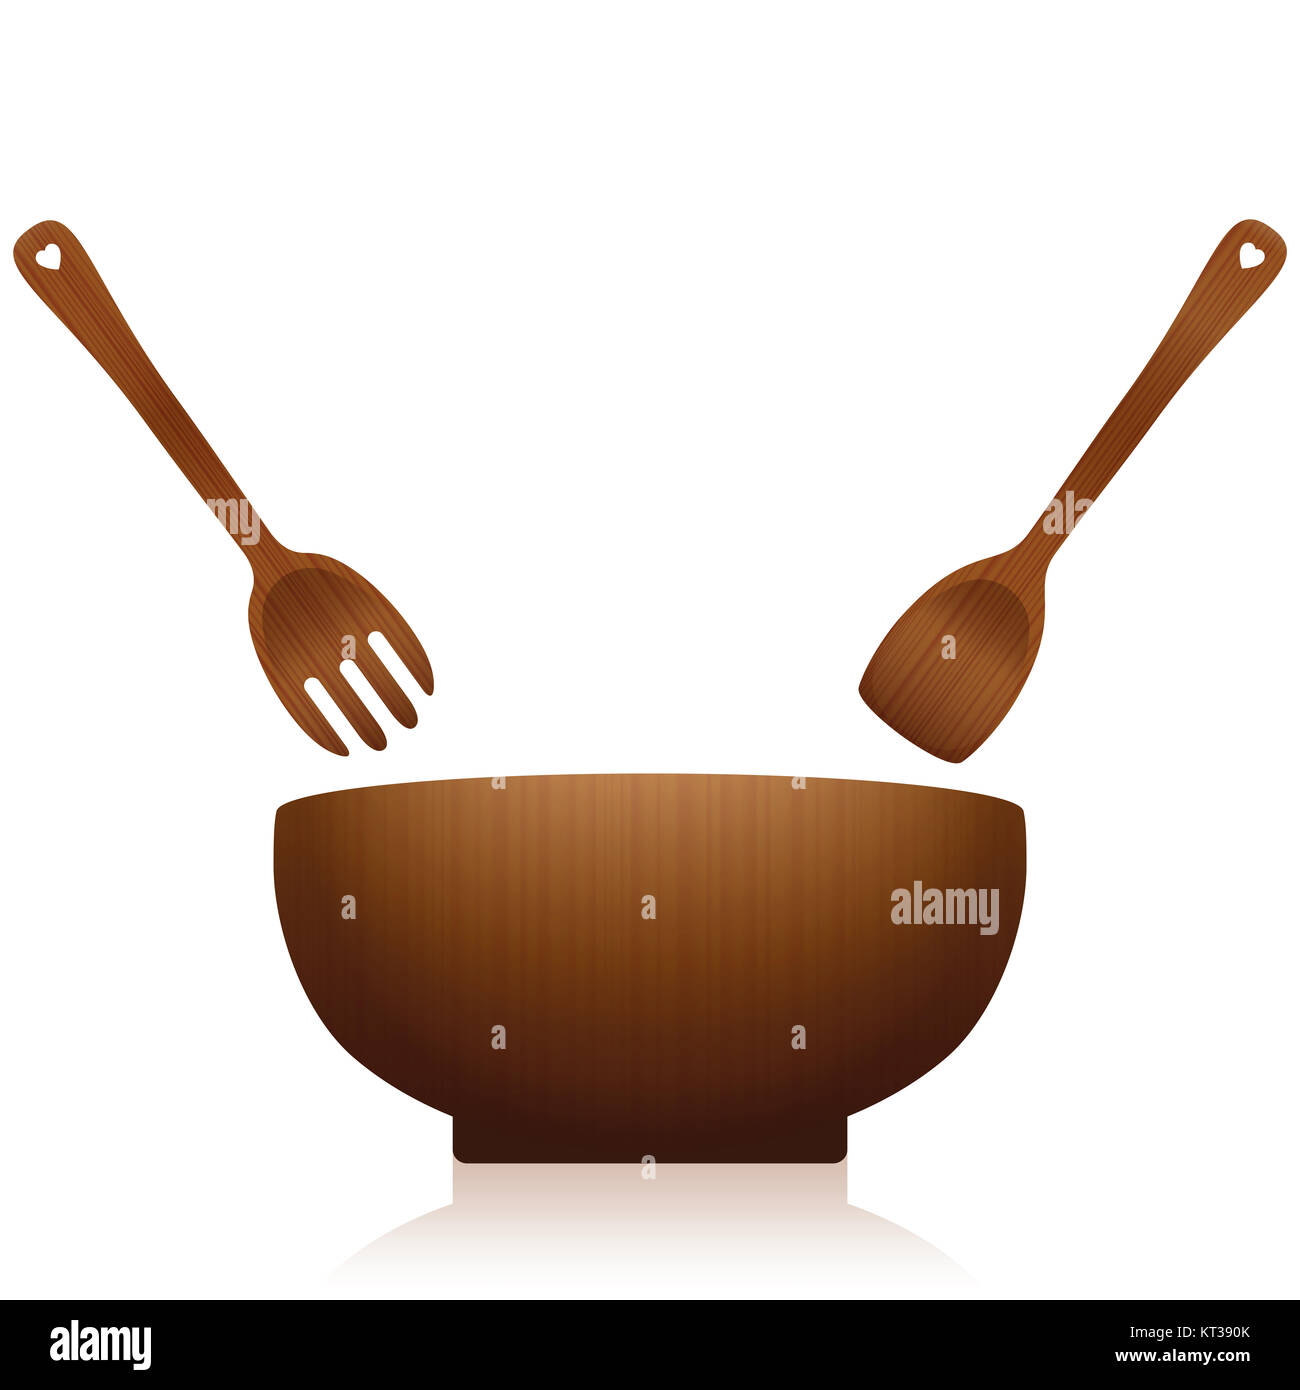 Salad bowl and servers - dark wooden rural kitchen tool set with fork and spoon situated over an empty bowl - illustration on white background. Stock Photo